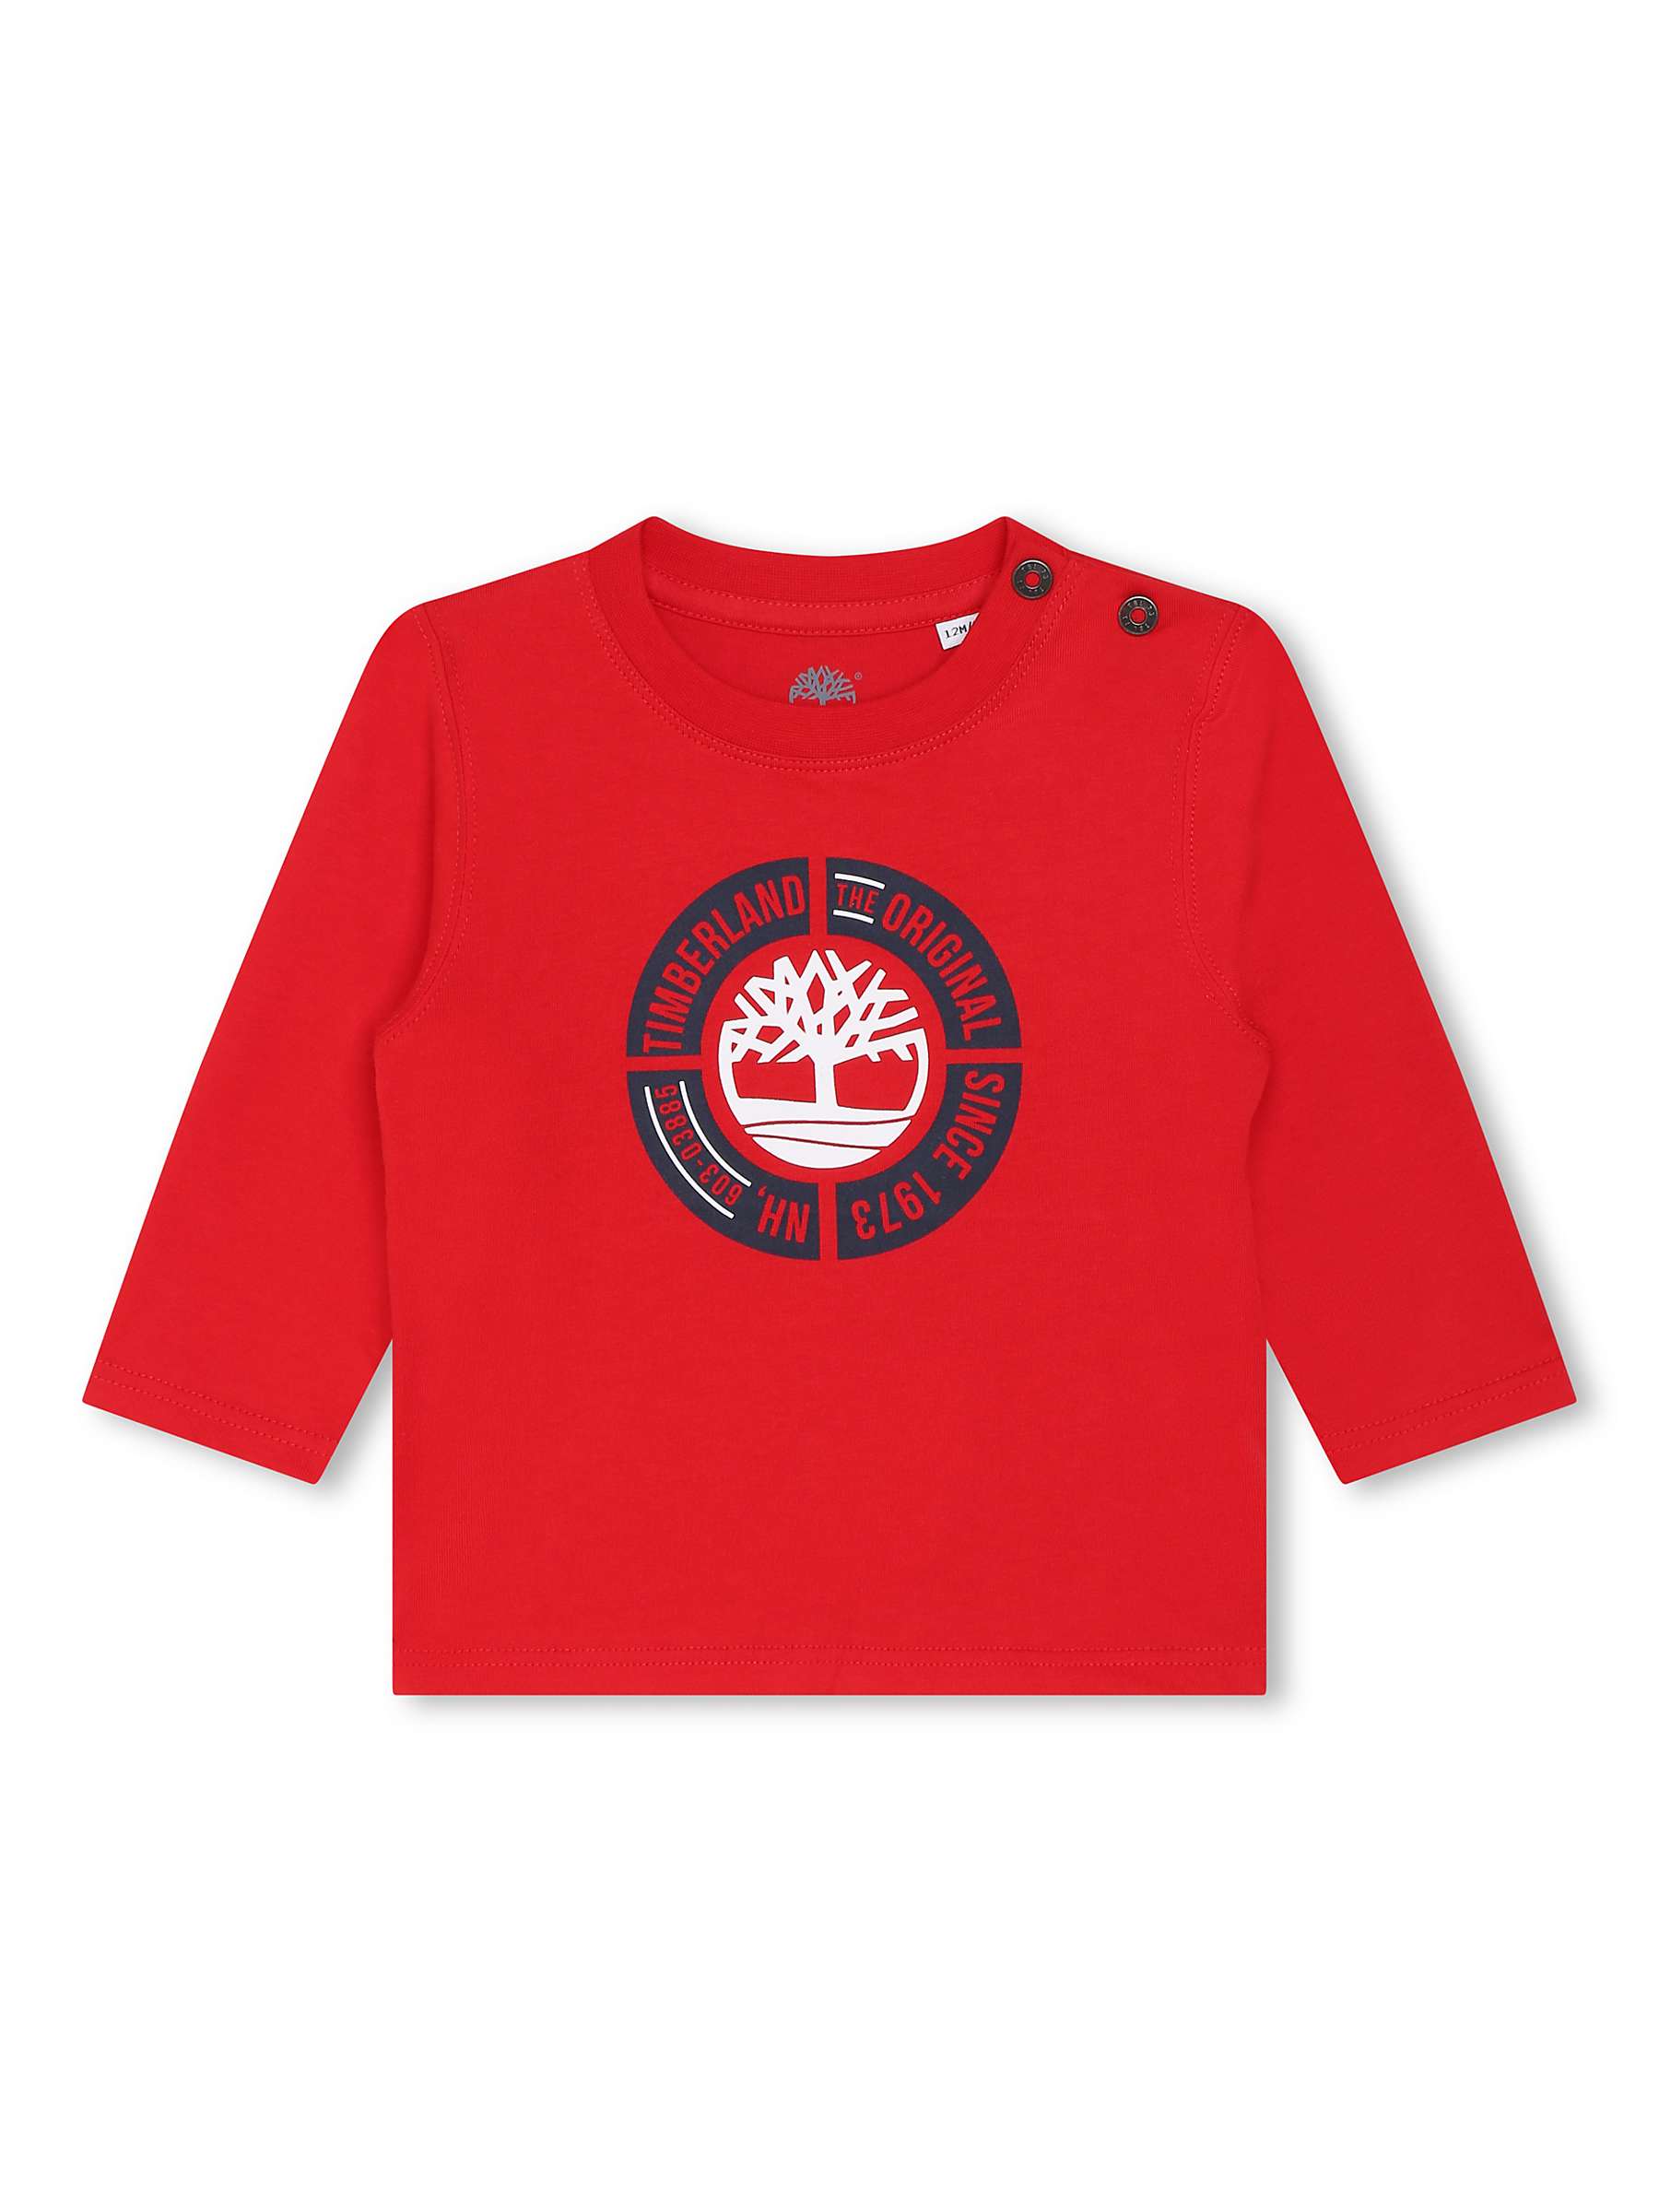 Buy Timberland Baby Logo Organic Cotton T-Shirts, Pack of 2, White/Red Online at johnlewis.com